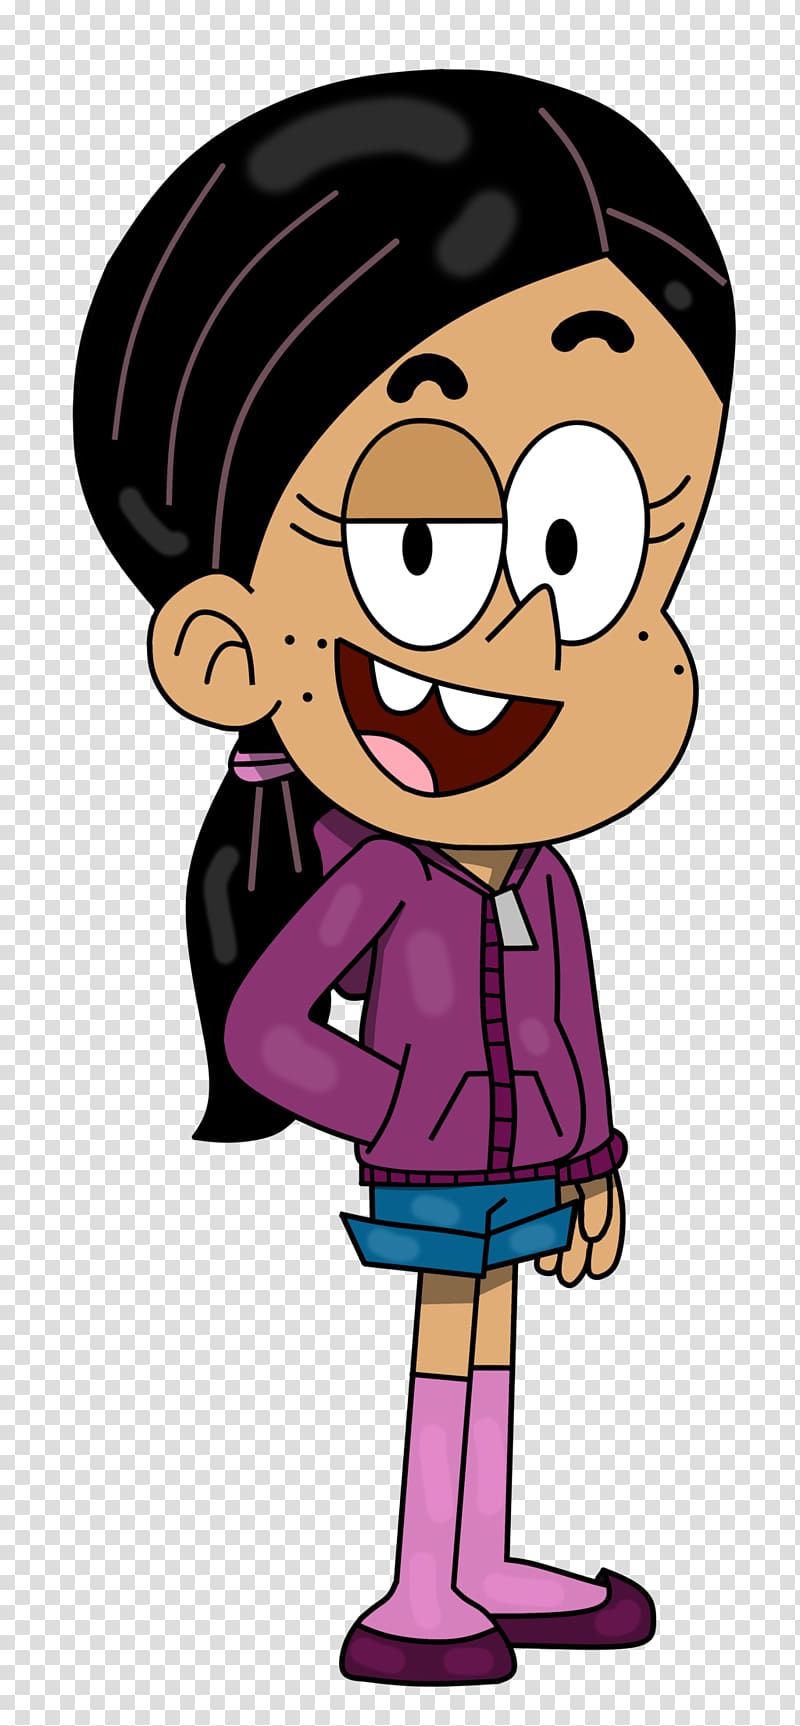 Lincoln Loud Clyde McBride Lisa Loud Nickelodeon, The Loud House transparent background PNG clipart